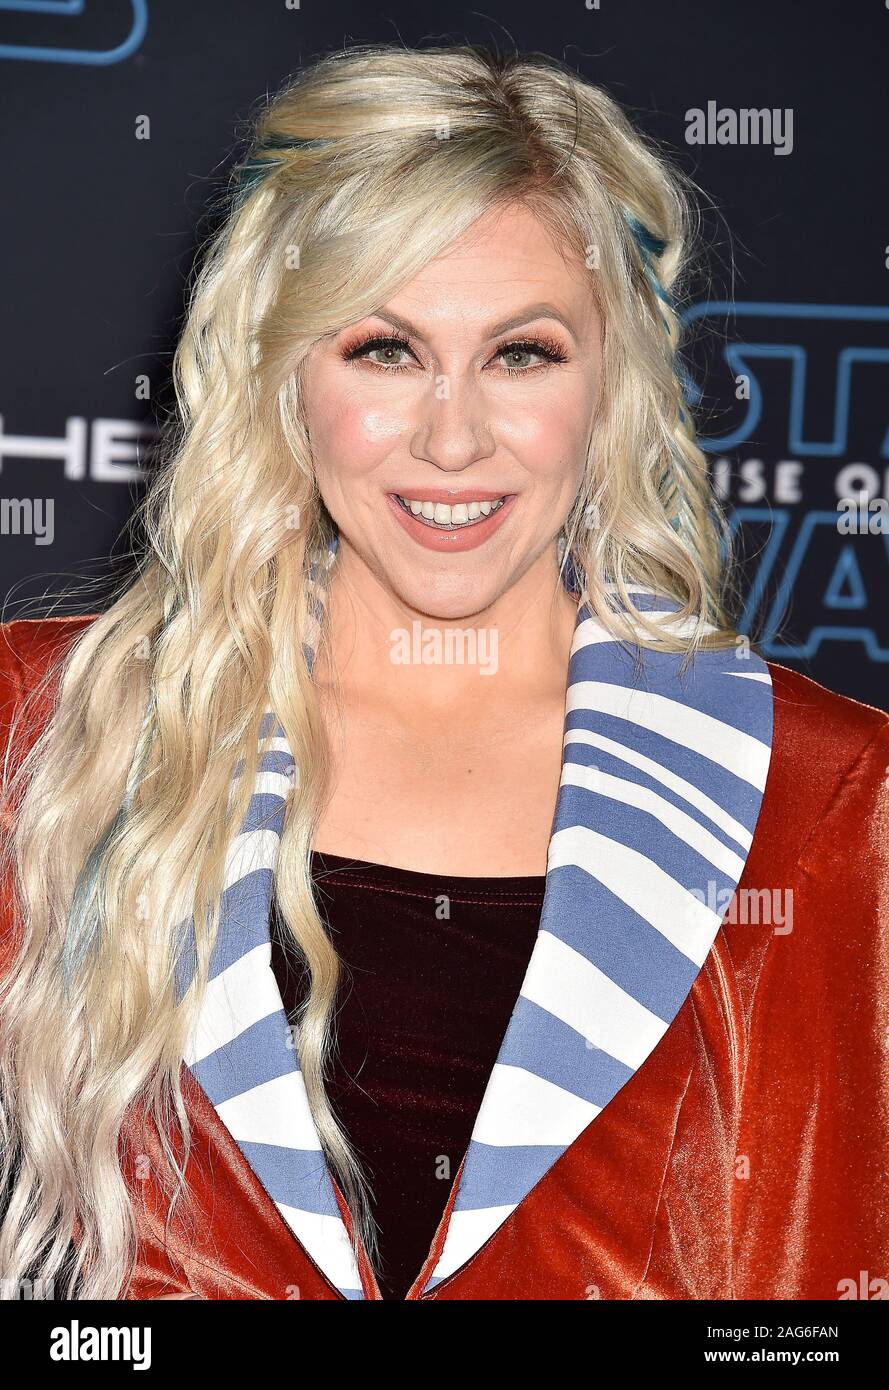 HOLLYWOOD, CA - DECEMBER 16: Ashley Eckstein attends the Premiere of Disney's 'Star Wars: The Rise Of Skywalker' at the El Capitan Theatre on December 16, 2019 in Hollywood, California. Stock Photo